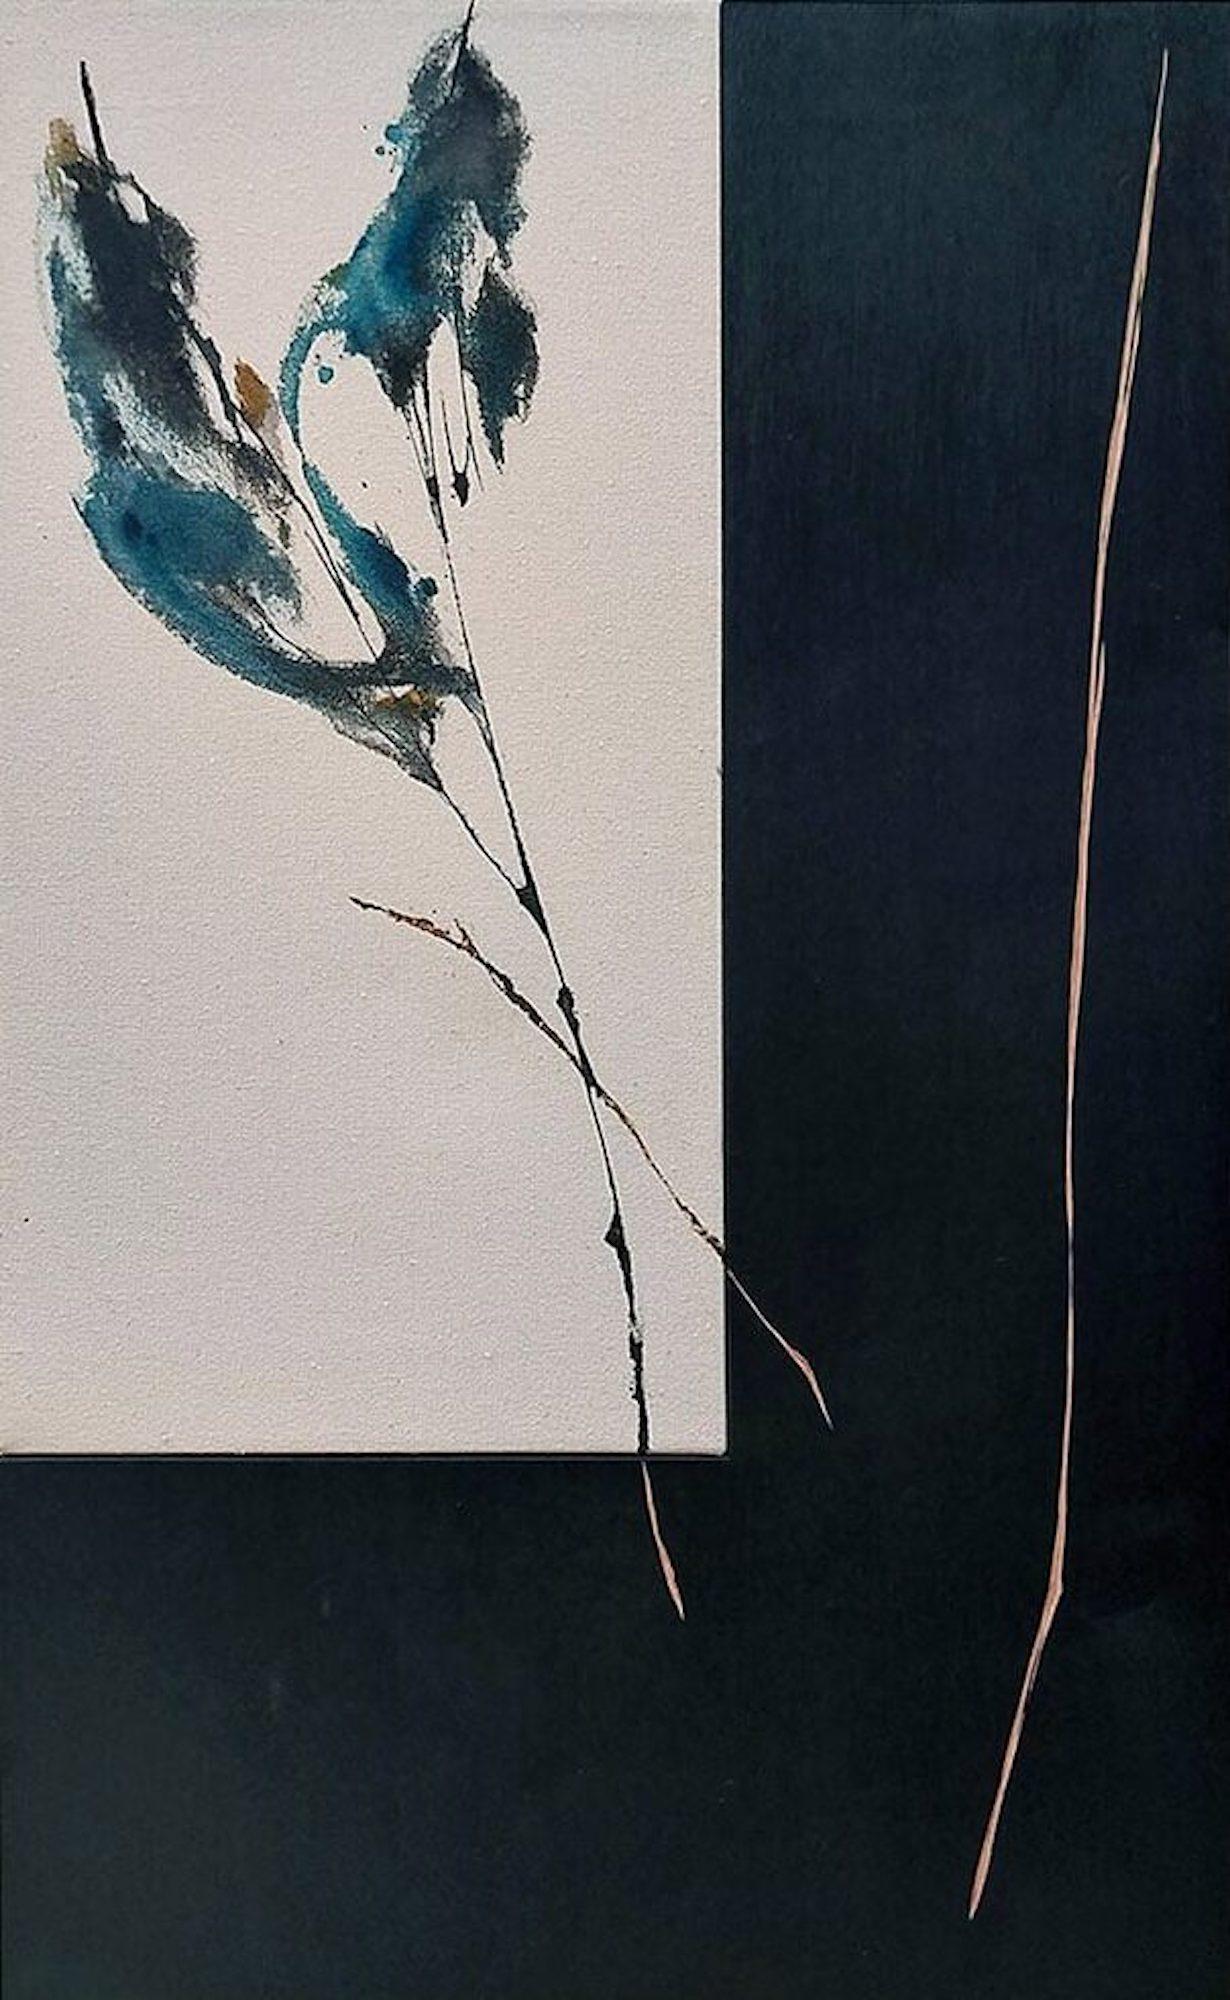 Newborn sound #94 by Maho Maeda - Abstract painting, flower, canvas and wood